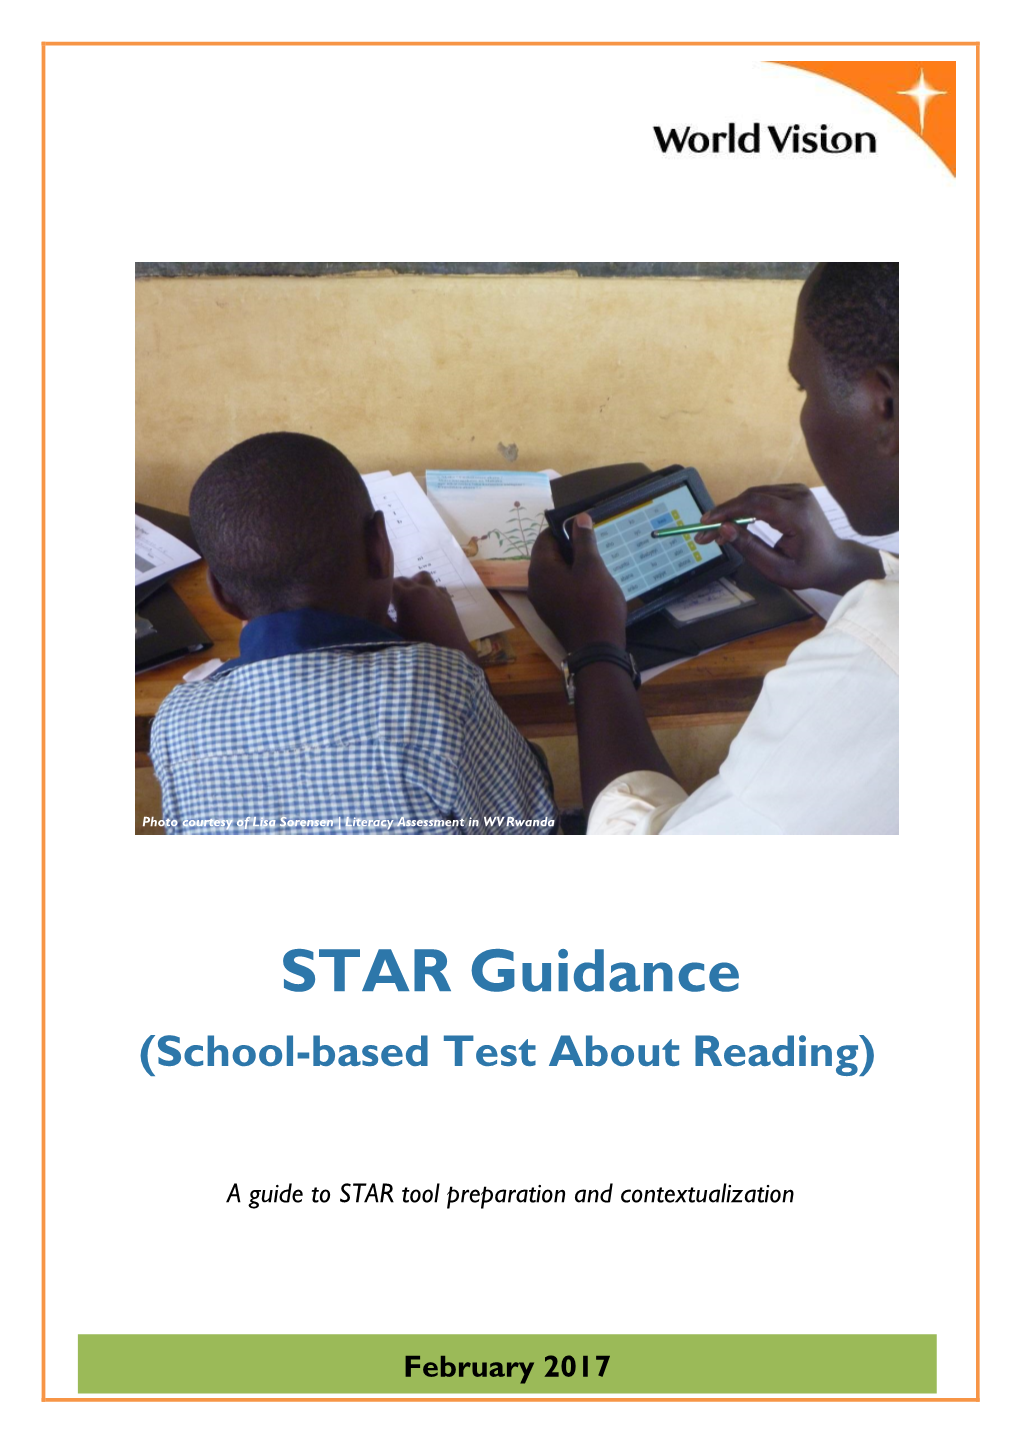 STAR Guidance (School-Based Test About Reading)